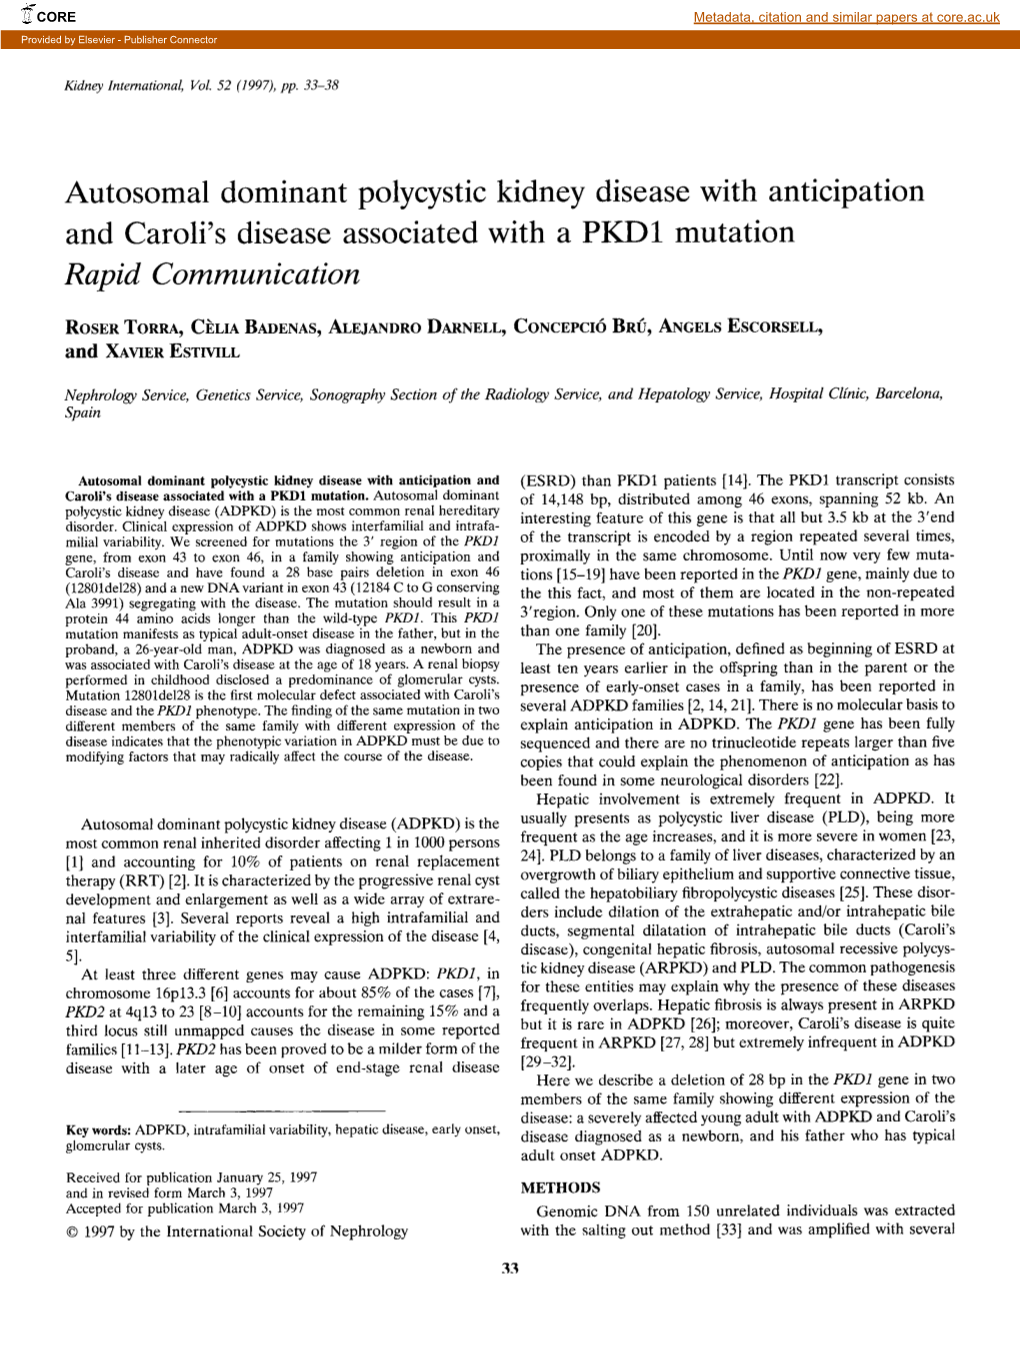 Autosomal Dominant Polycystic Kidney Disease with Anticipation and Caroli's Disease Associated with a PKD1 Mutation Rapid Communication